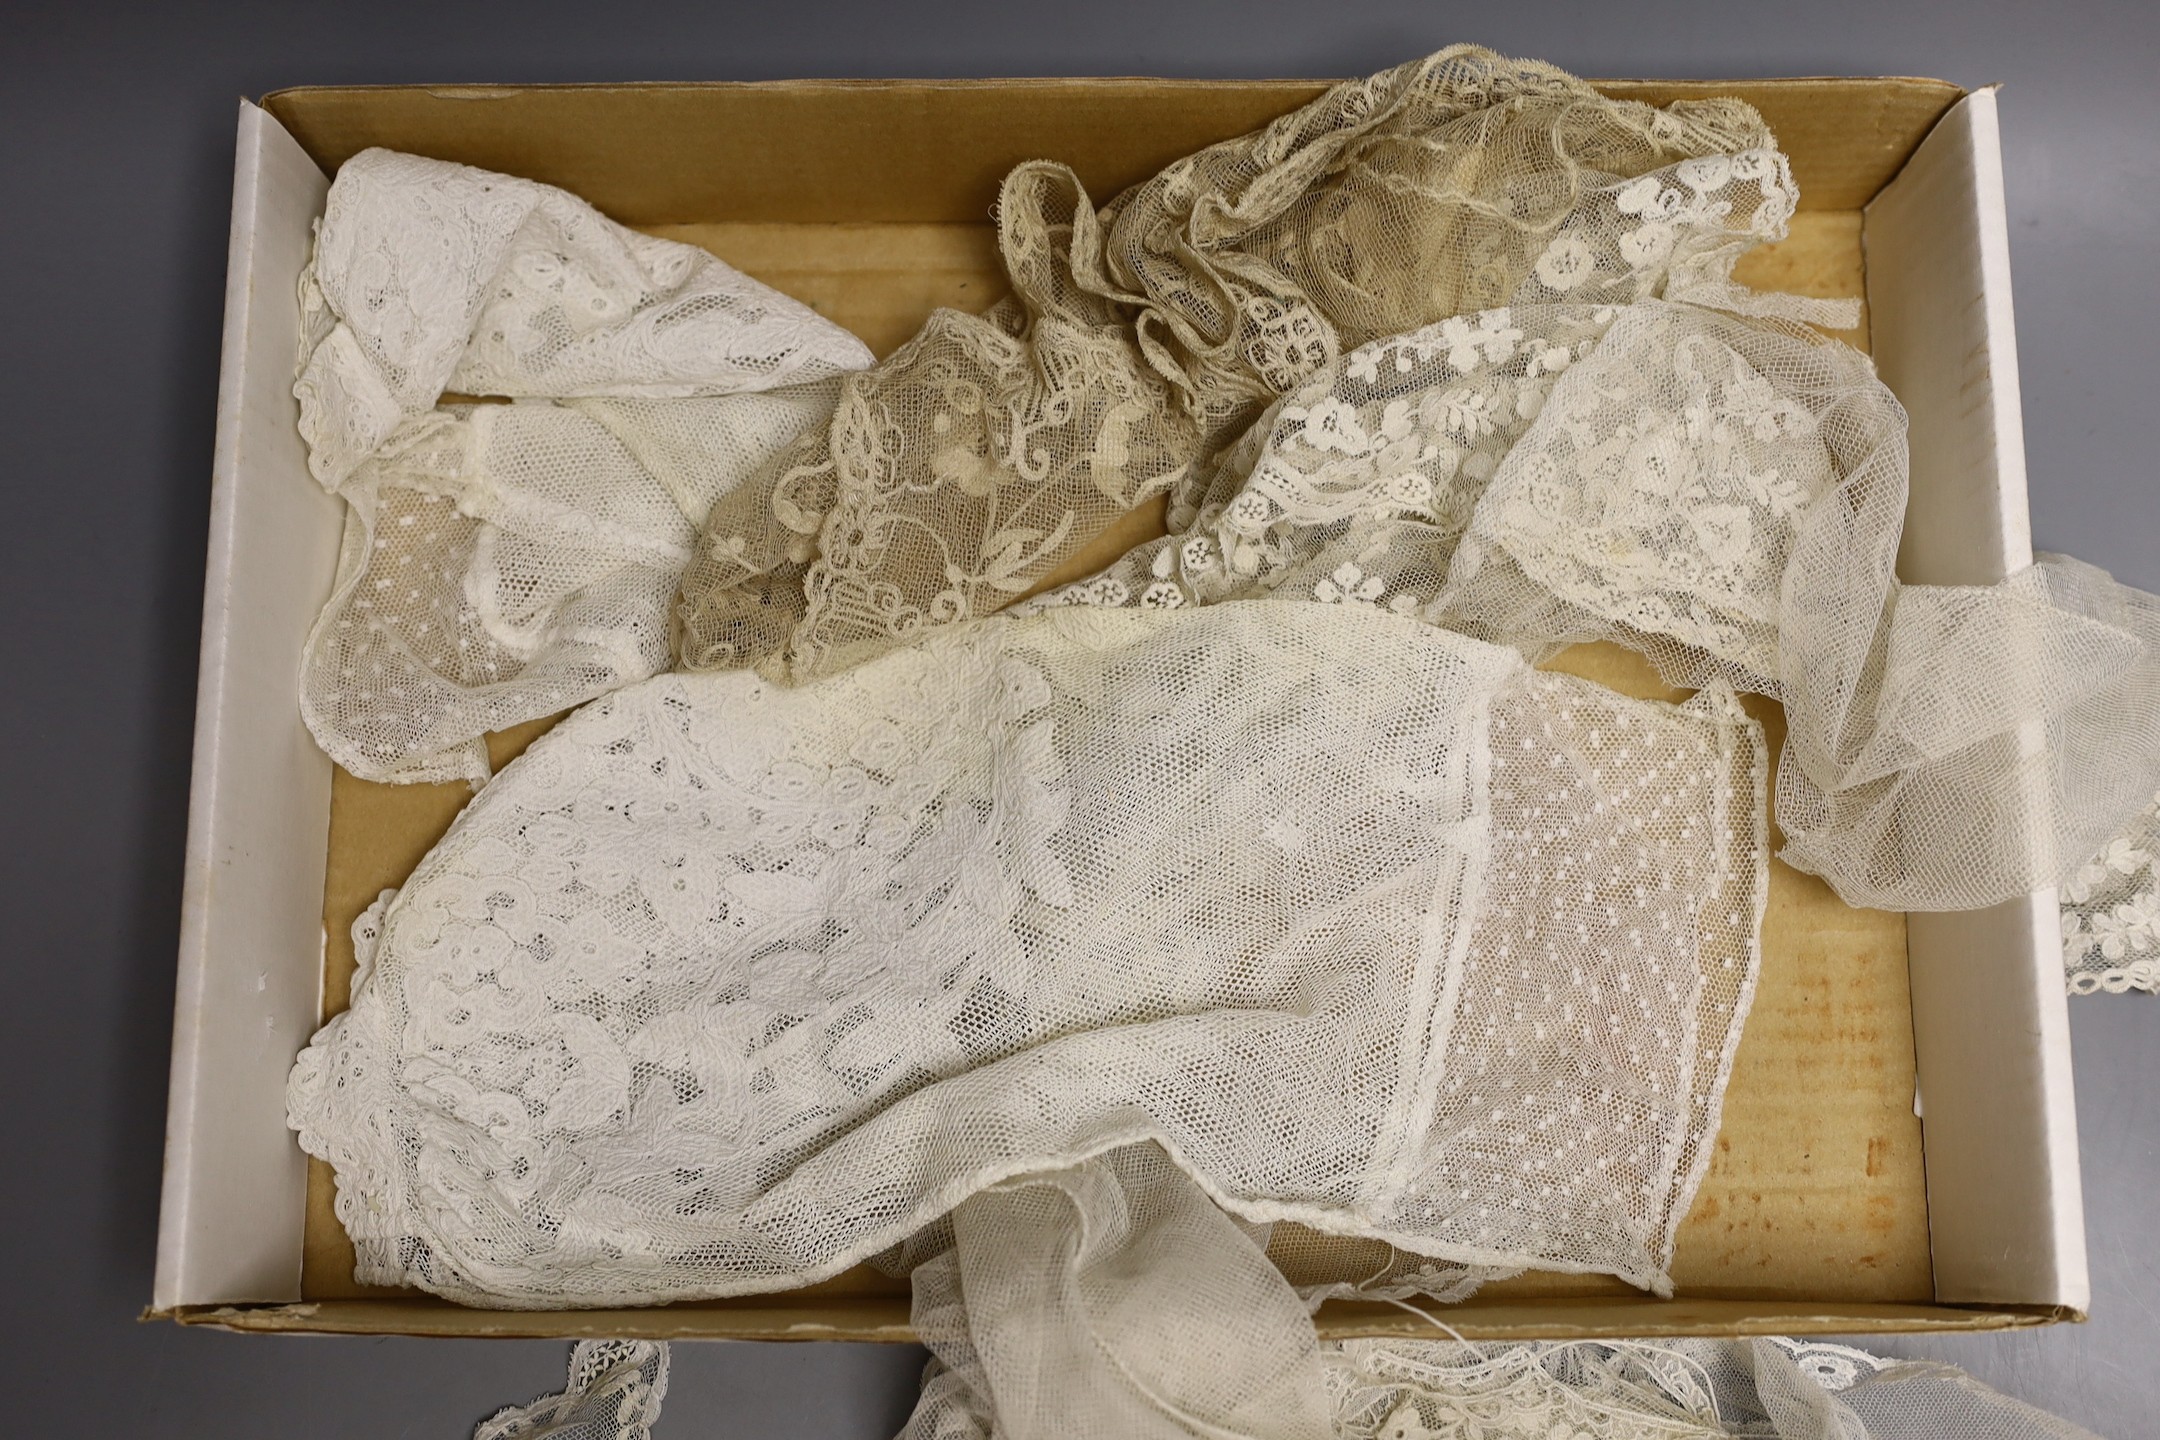 19th century Brussels bobbin lace bonnet veil, a Honiton edged and spot motif veil, a needle run veil and bonnet veil, two needle run collars, a Carrick & Cross collar and two pairs of sleeves.